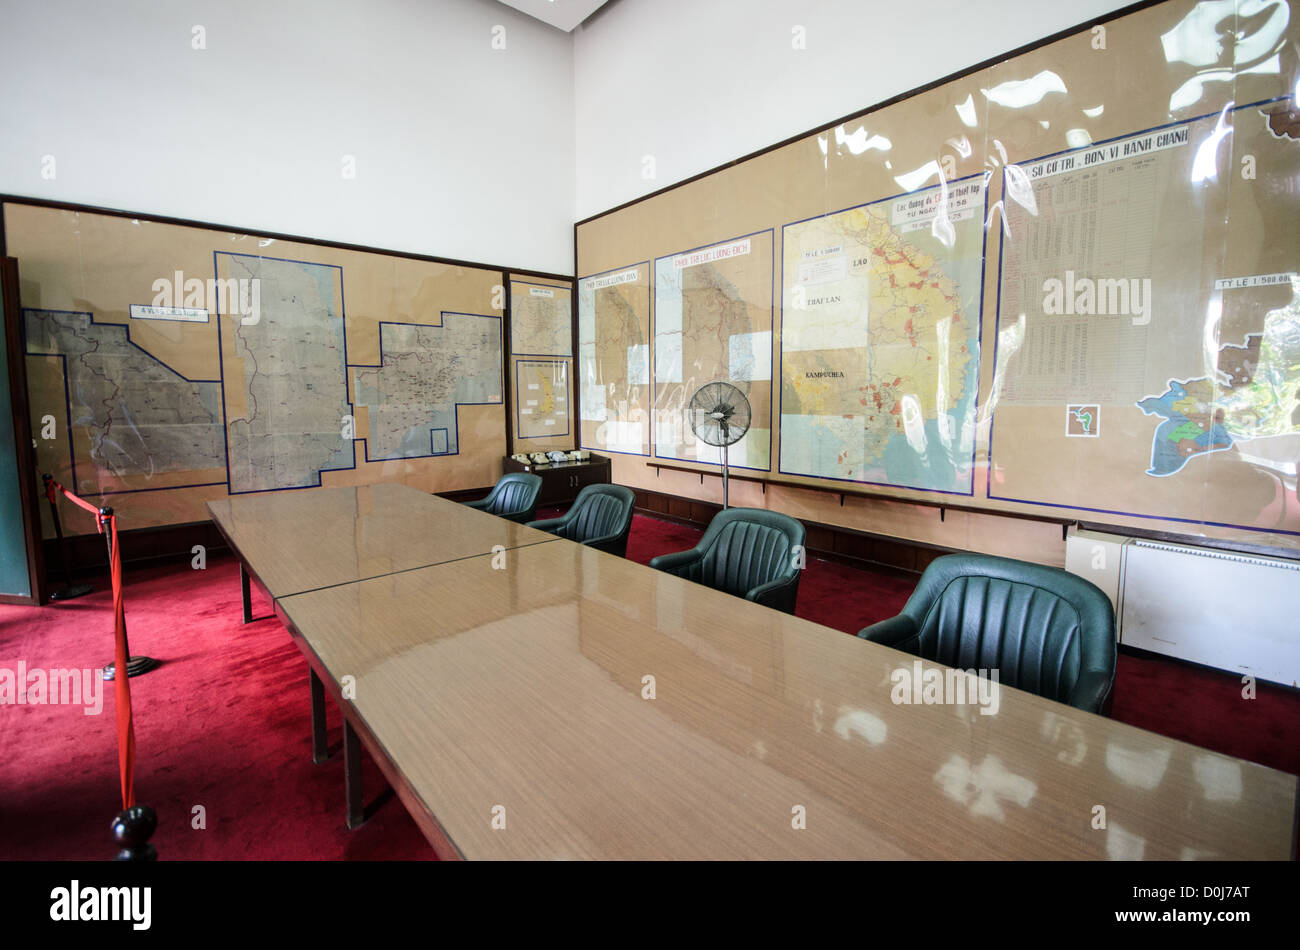 HO CHI MINH CITY, Vietnam - The Map Room in Reunification Palace (the former Presidential Palace) in downtown Ho Chi Minh City (Saigon), Vietnam. The palace was used as the command headquarters of South Vietnam during the Vietnam War. Stock Photo